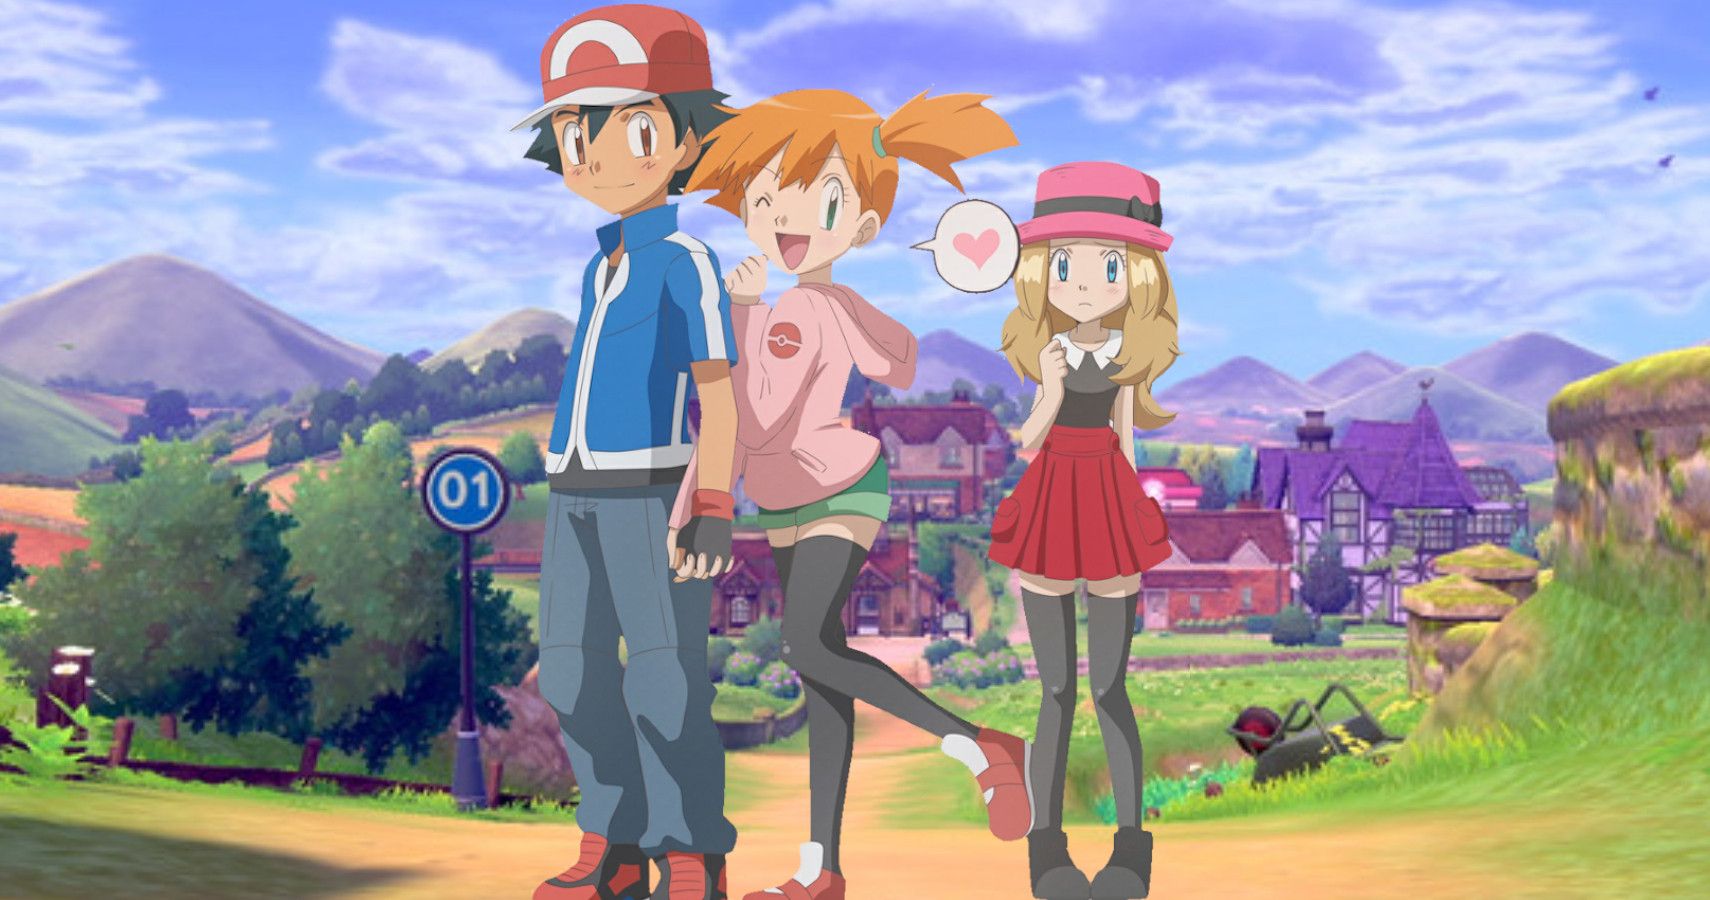 How did Serena knew Ash even before he introduced himself to her? - Quora